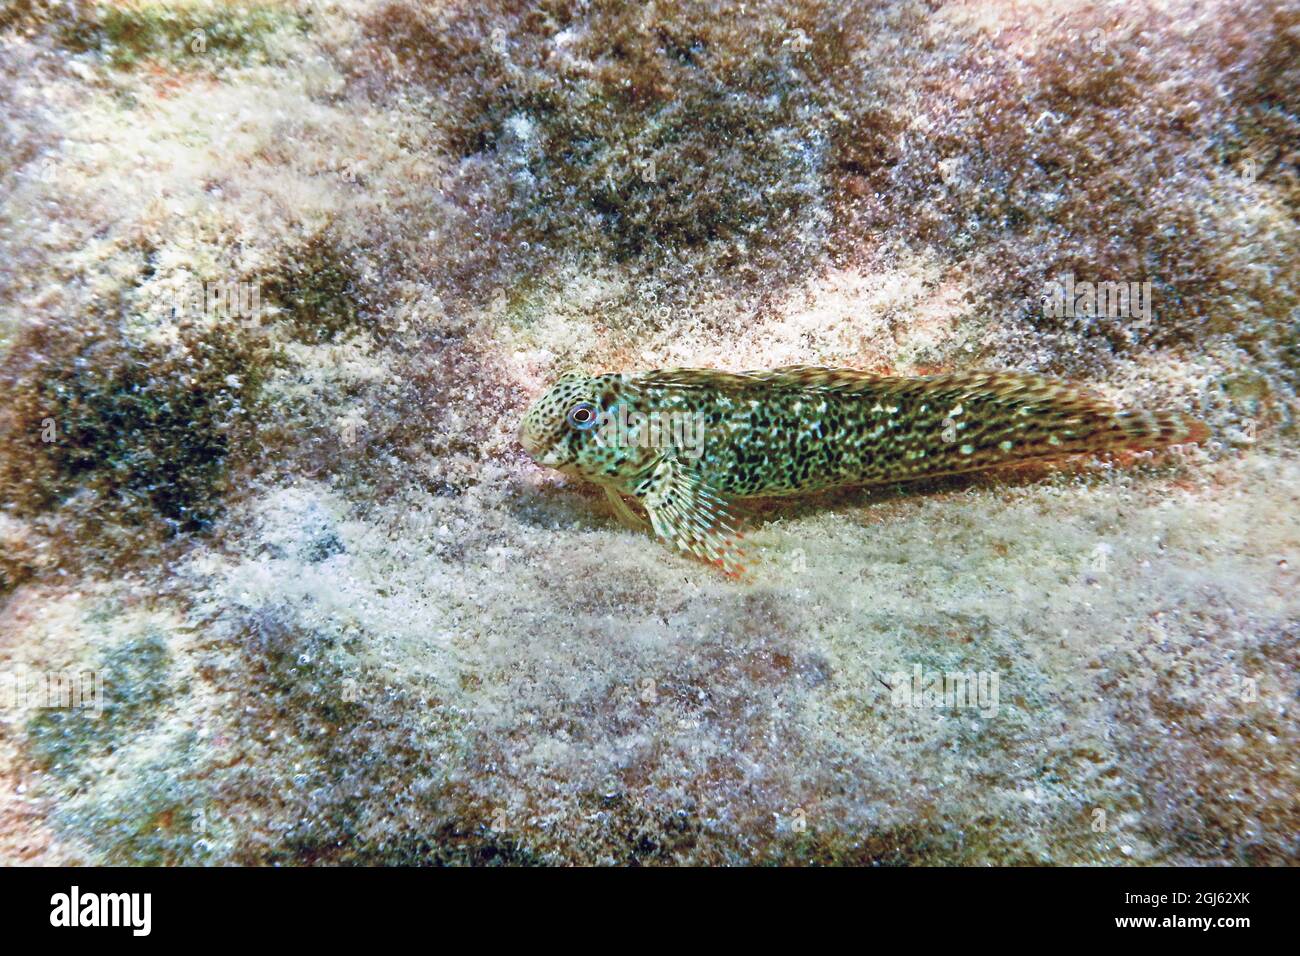 Portrait Of Cute Blenny fish, Close up Stock Photo